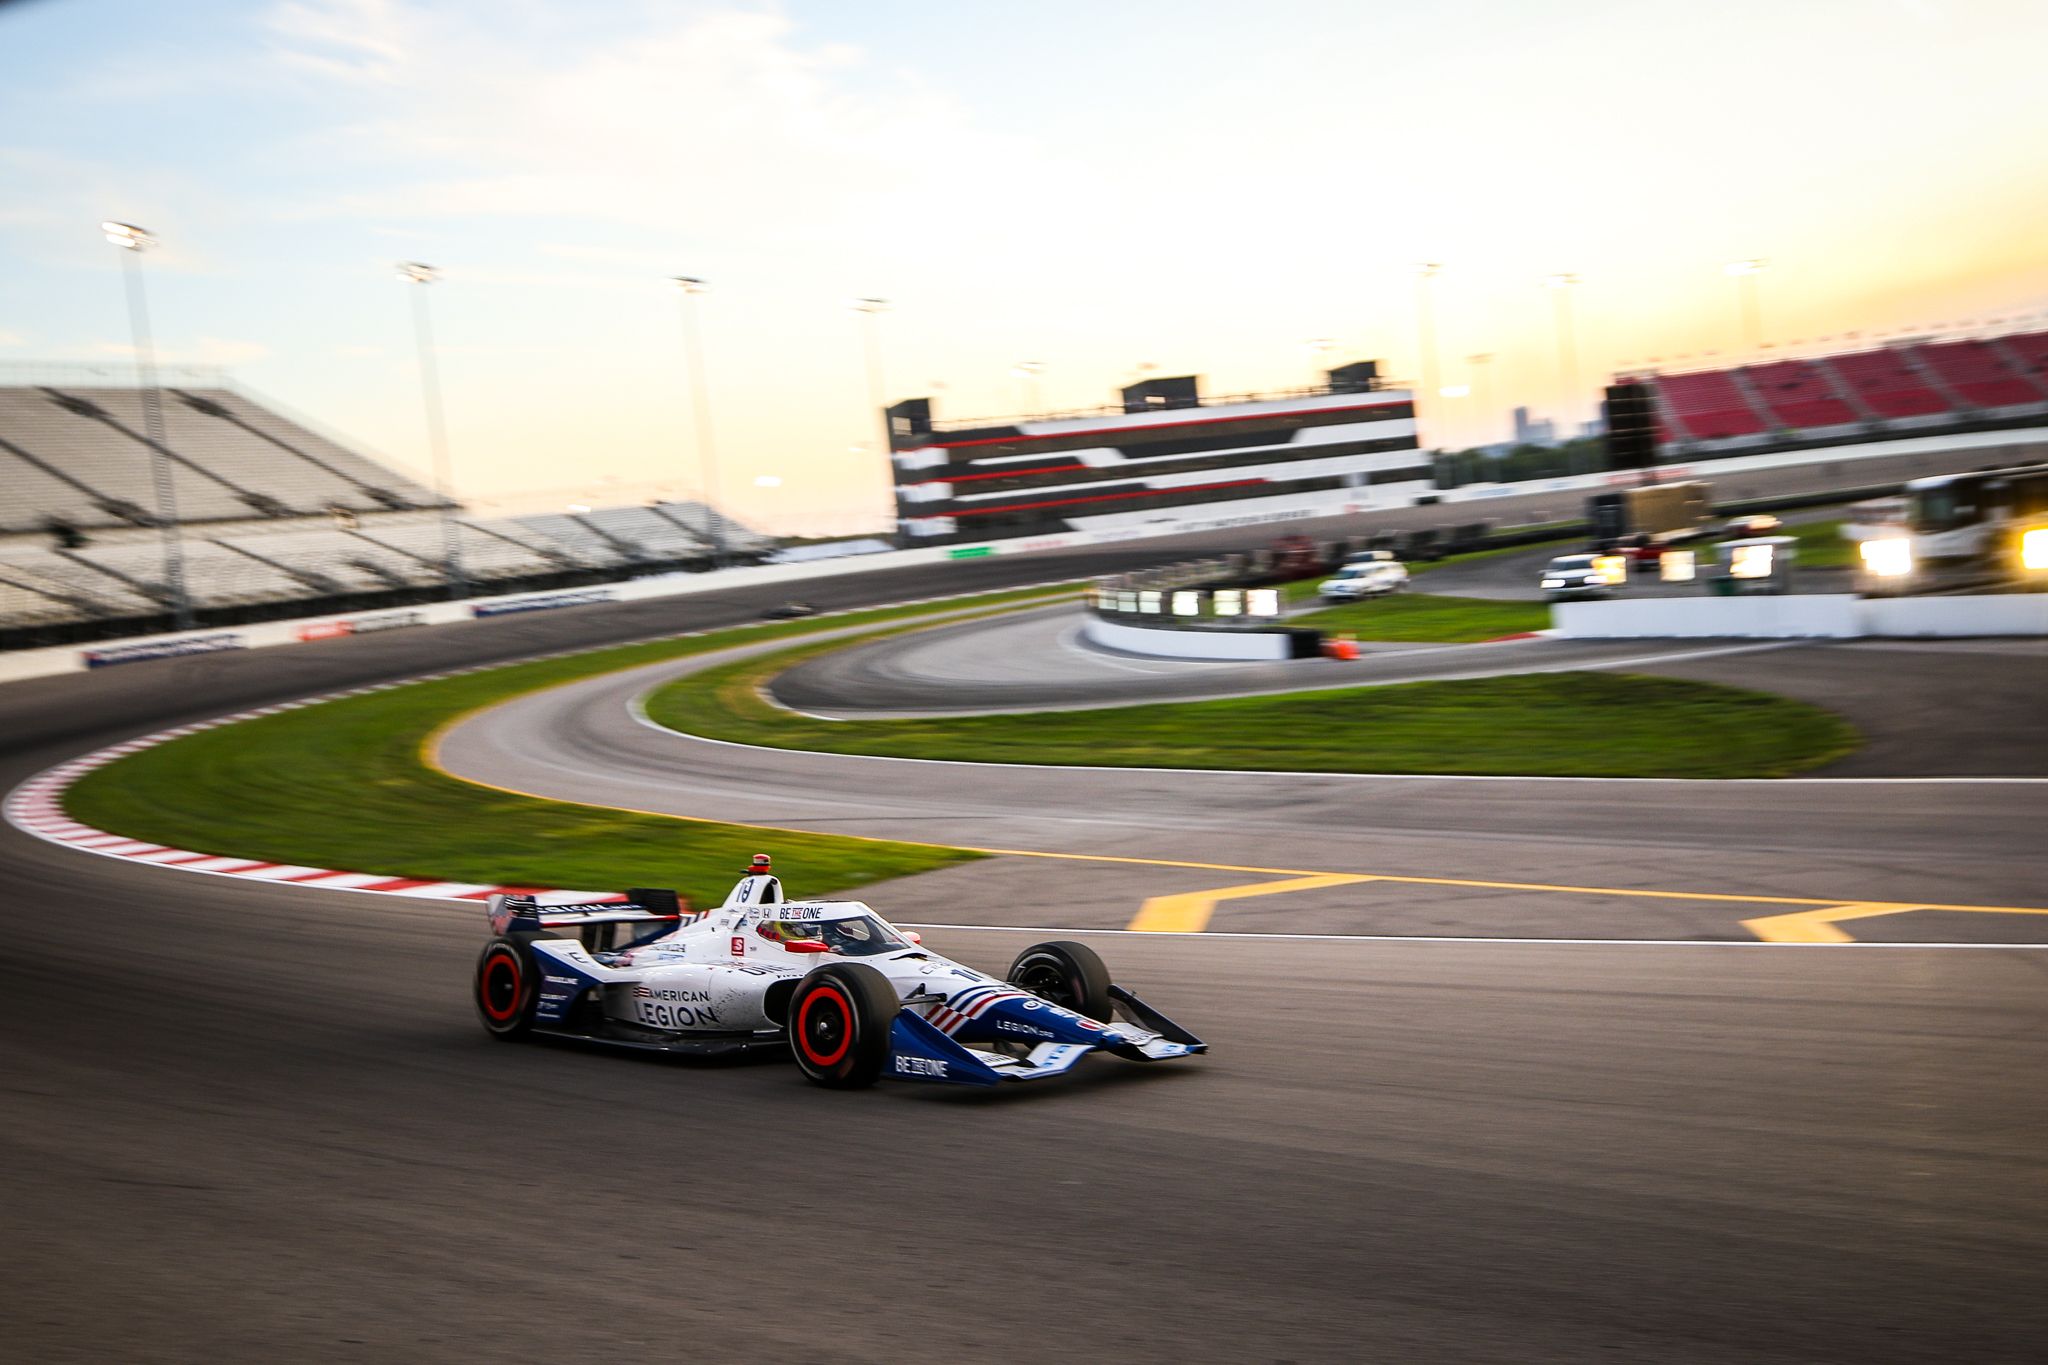 Palou “still in the hunt” for Indycar title